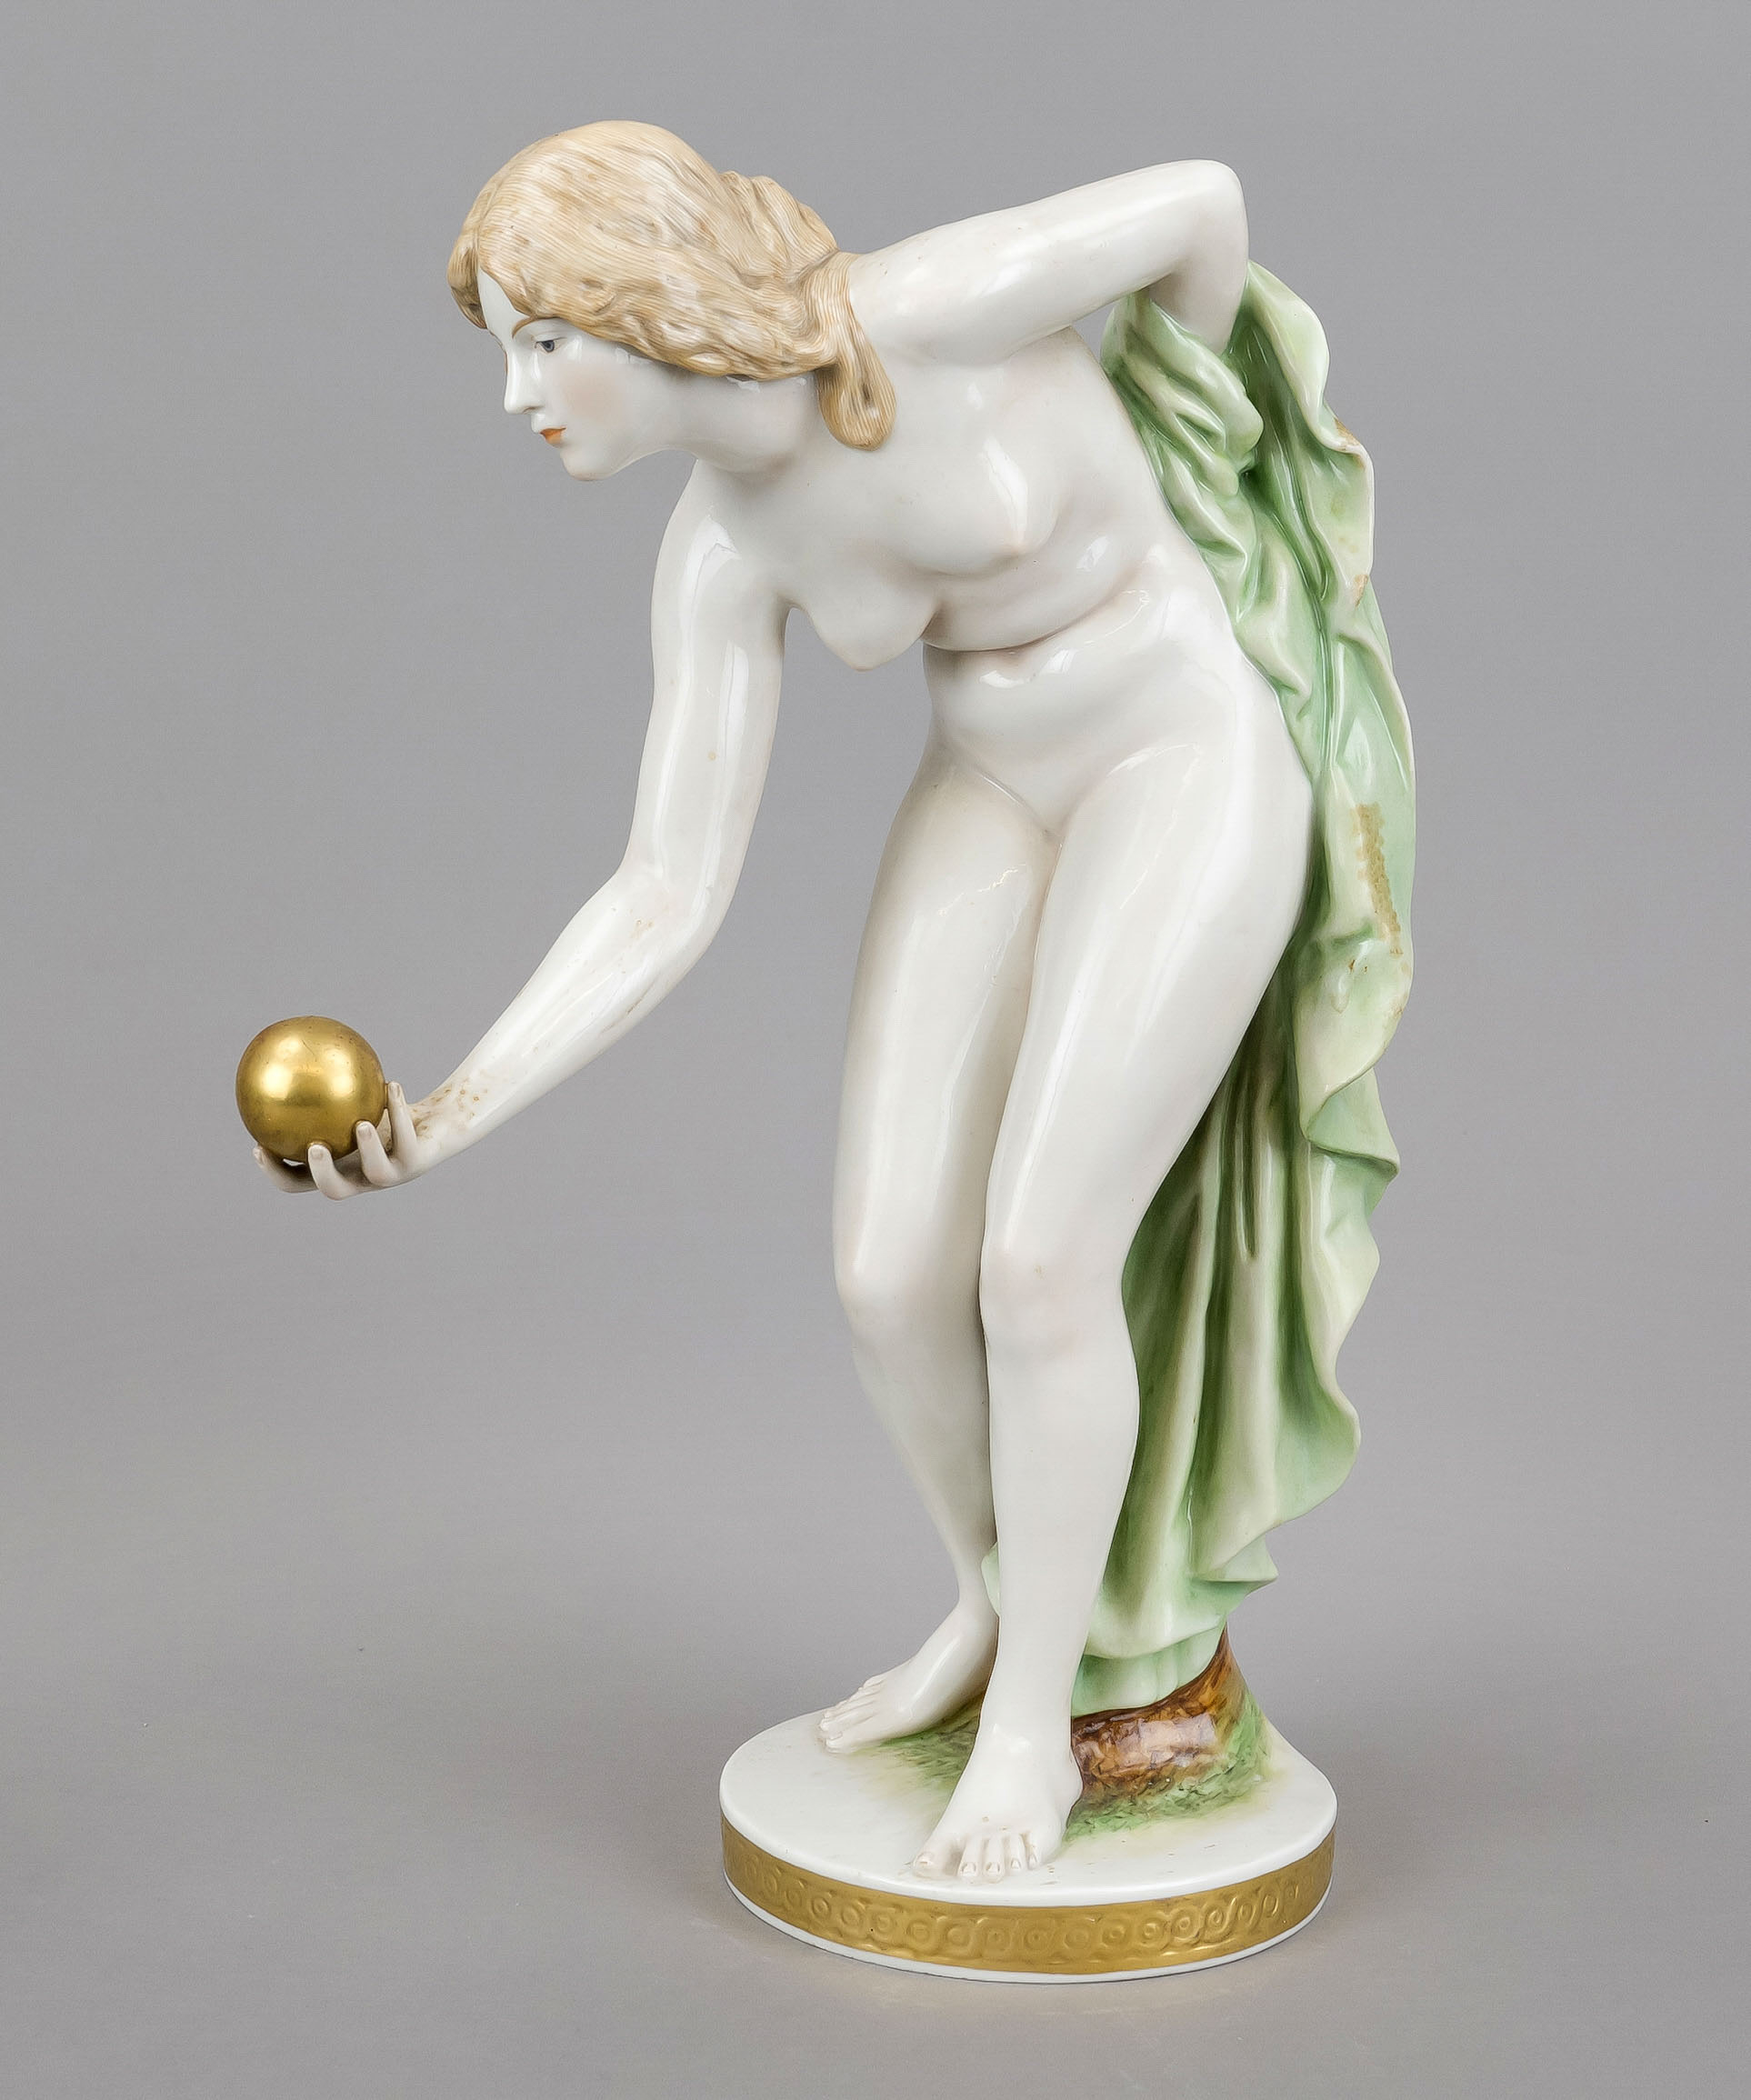 Ball player, Scheibe-Alsbach, Thuringia, 20th century, After the Meissen model by Walter Schott. A